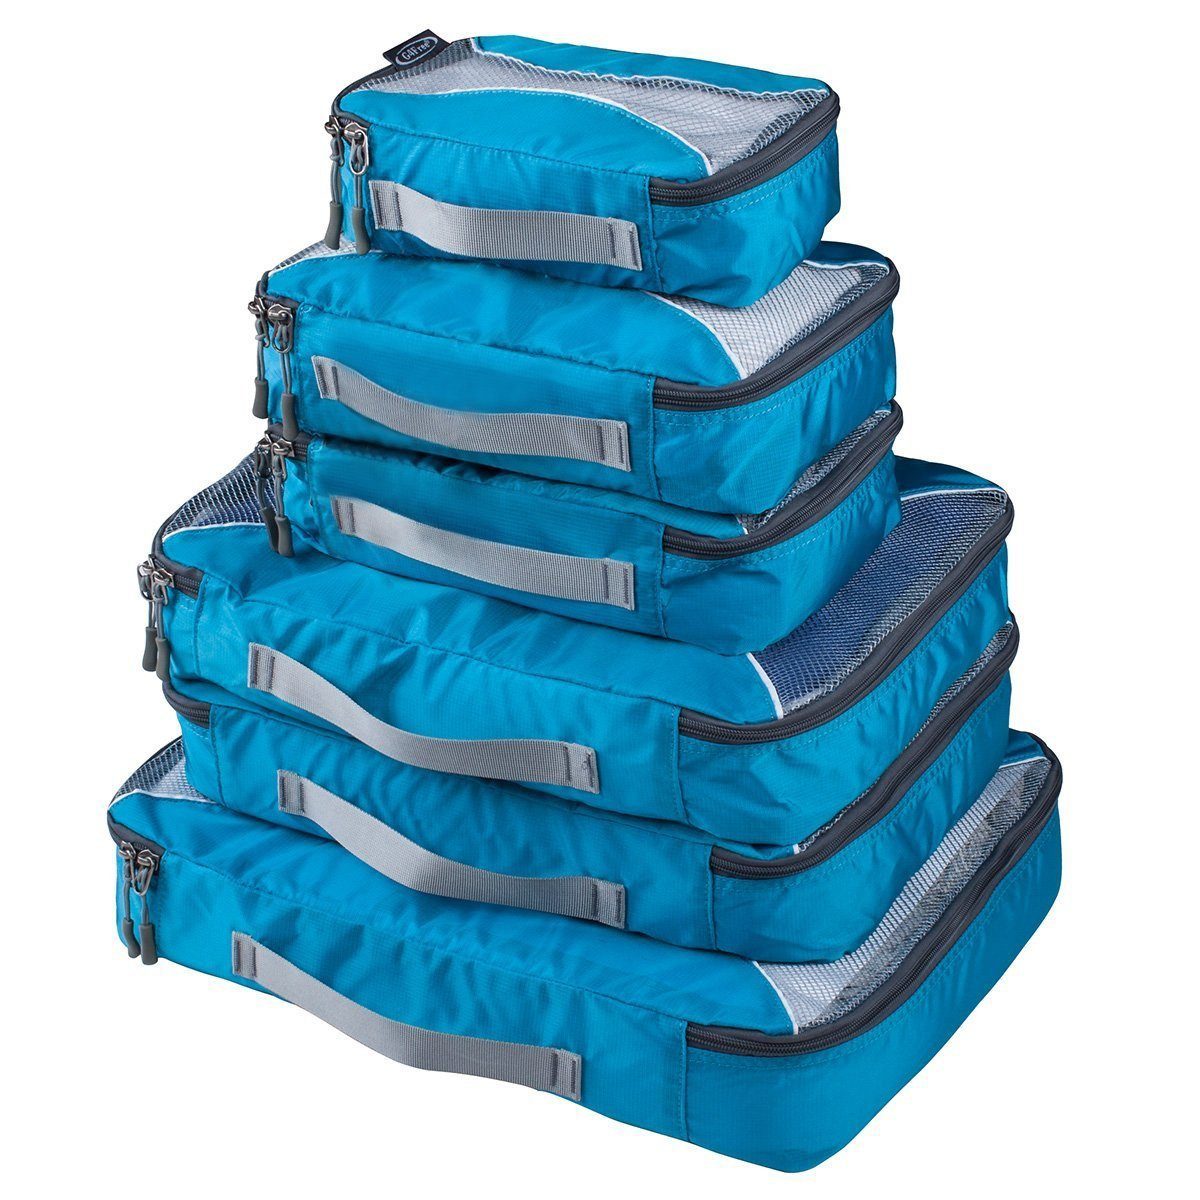 Best Packing Cubes for Travel UK Reviews 2019 | Luggage News